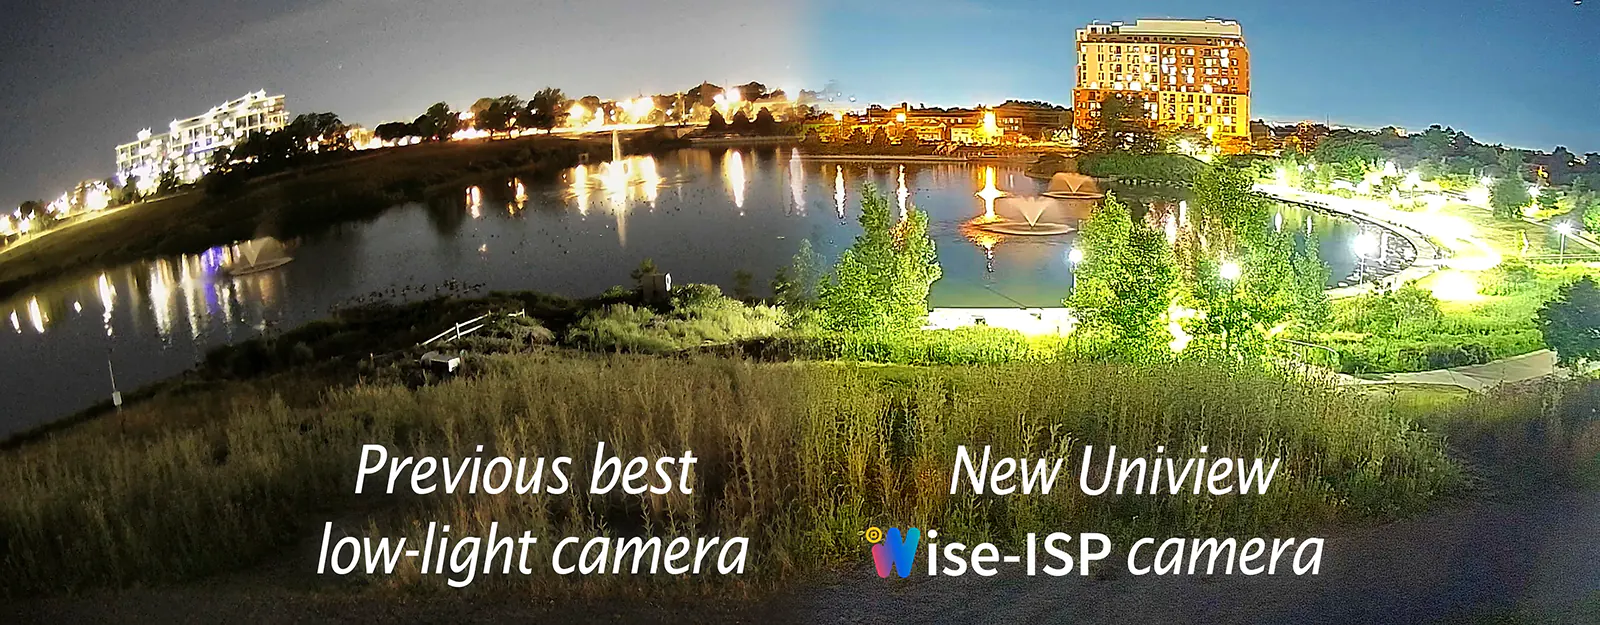 You are currently viewing Uniview’s Wise-ISP camera has the best low-light performance we’ve seen